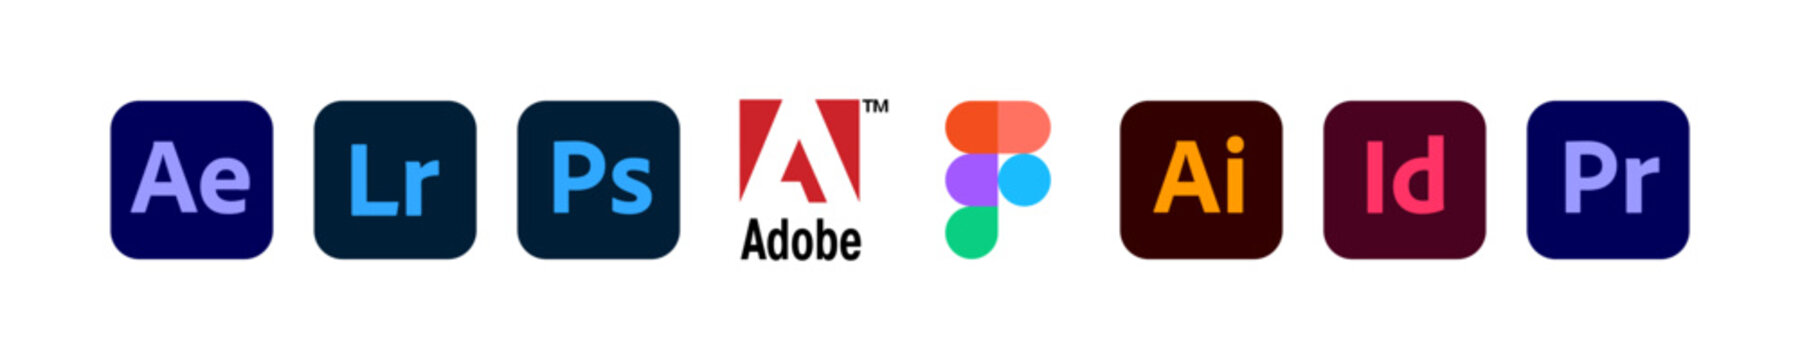 Adobe company app logo. Photoshop, premiere pro, figma, illustrator, after effects, lightroom, indesign web logotype editorial in vector flat style.